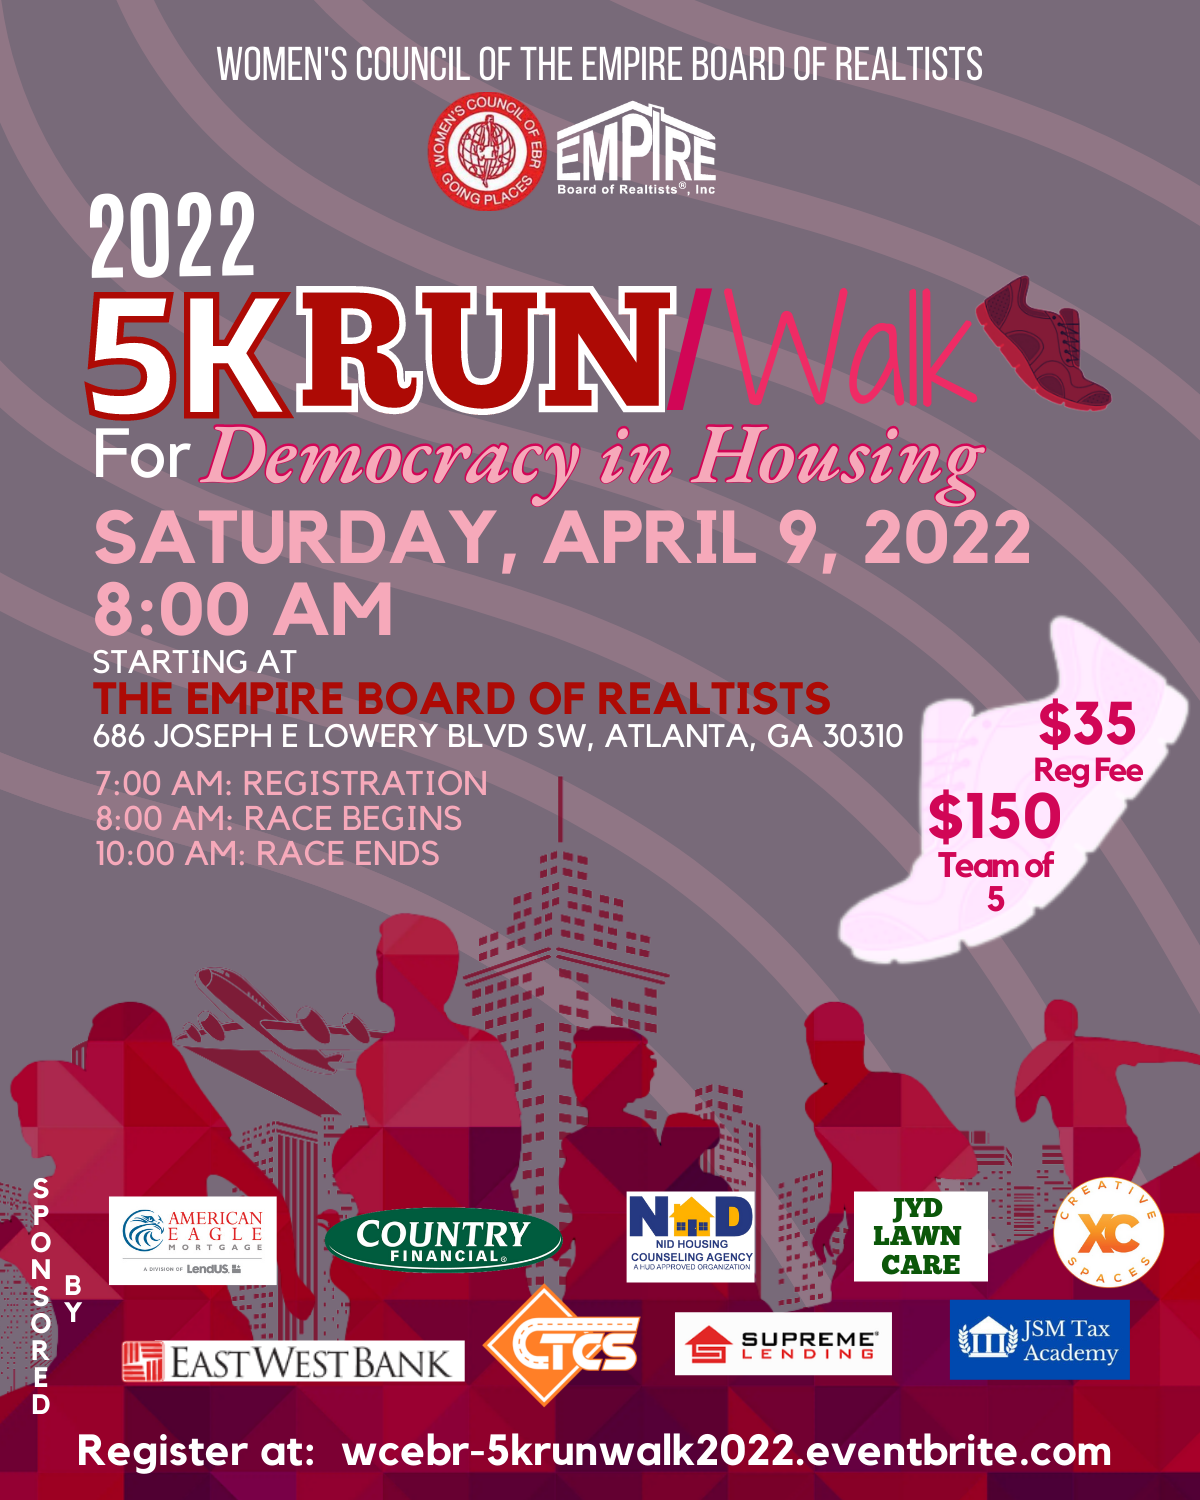  Get your running shoes and join us at our Annual Women’s Council of Empire Board of Realtists (WCEBR) 5k Run/Walk!  We are running for “Democracy In Housing”! We’d love to see you   https://wcebr-5krunwalk2022.eventbrite.com   Huge Thank You to our 